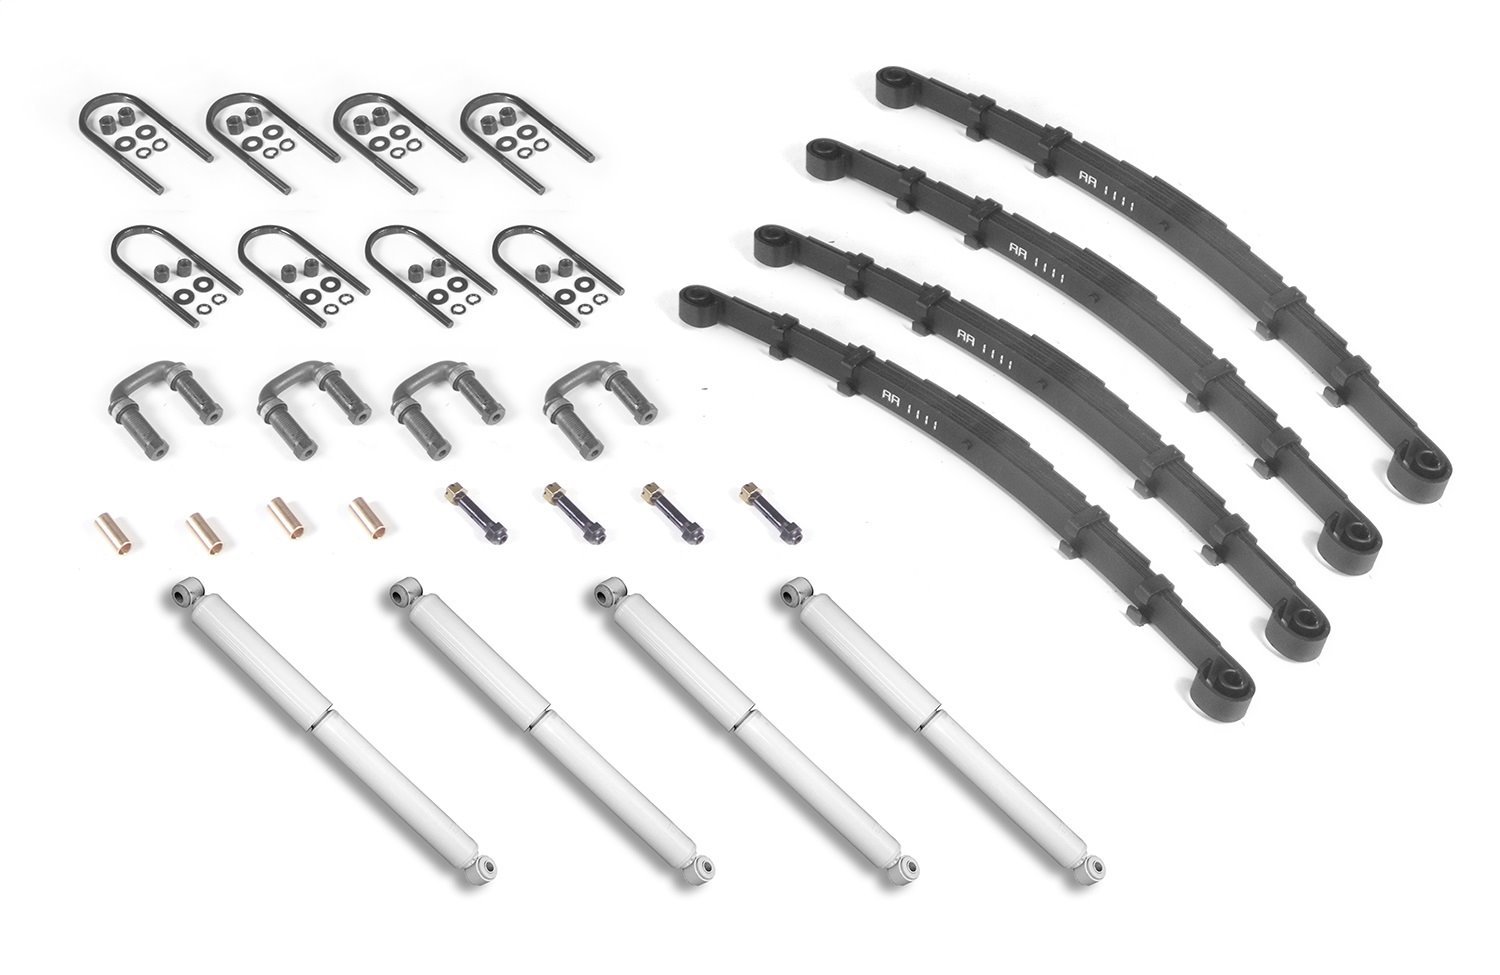 This Suspension Master Rebuilders Kit fits 41-45 Willys MBs 41-45 Ford GPWs 46-49 CJ2A 49-53 CJ3A 50-52 M38s and 53-68 CJ3B.